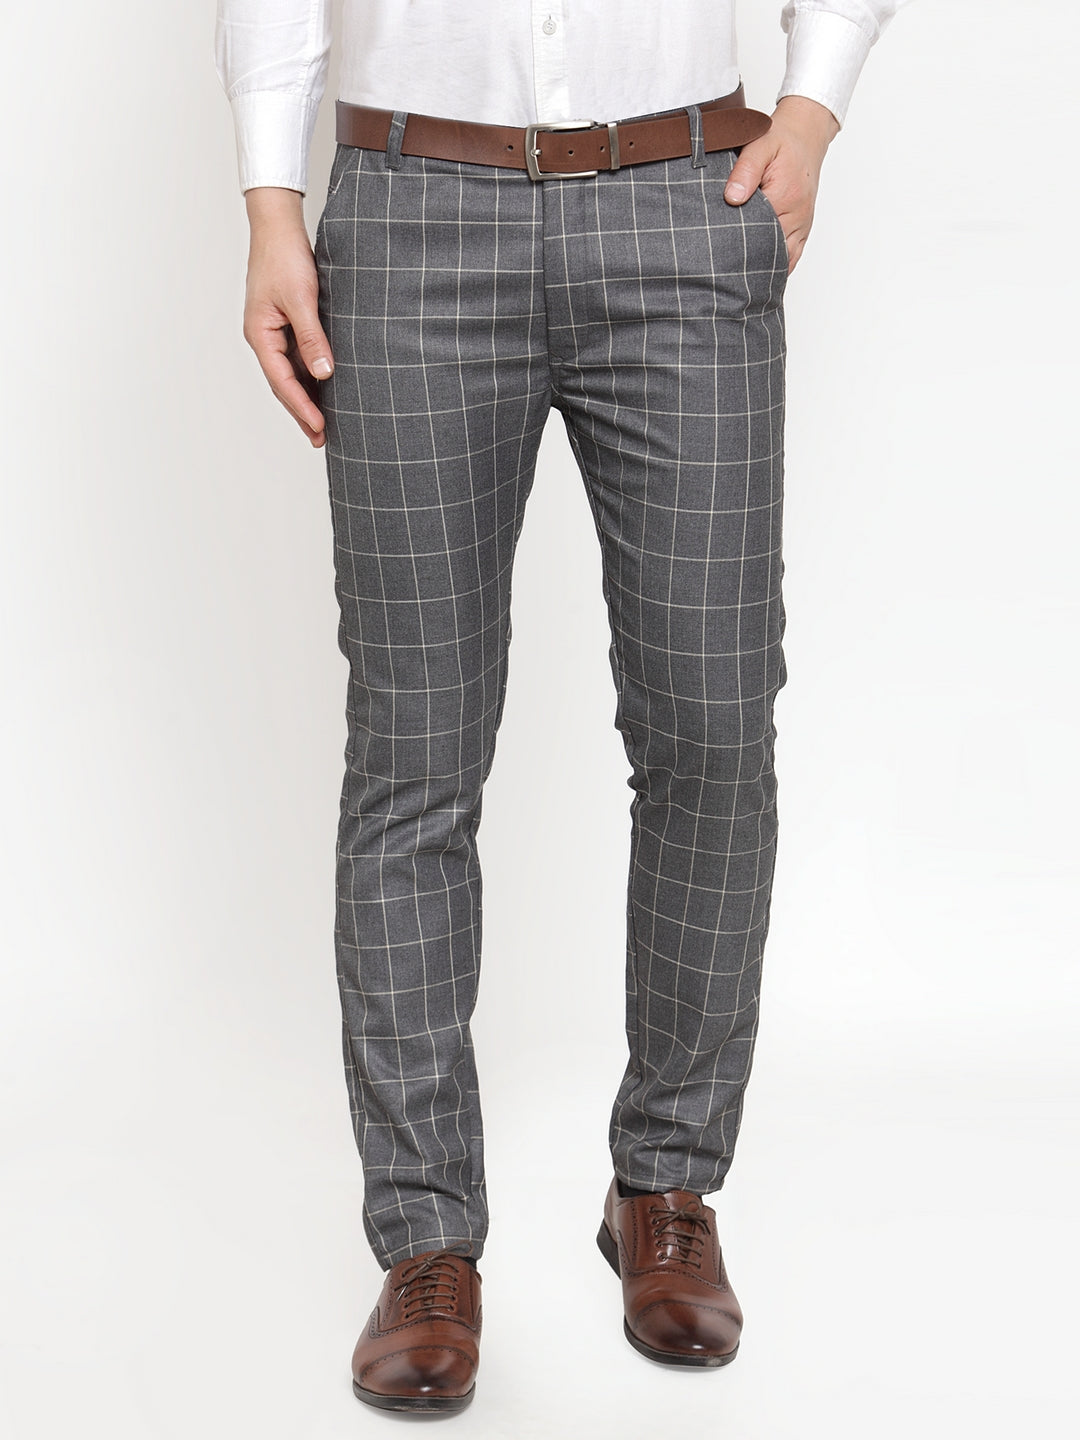 Multicolour Check Tapered Trouser | WHISTLES |